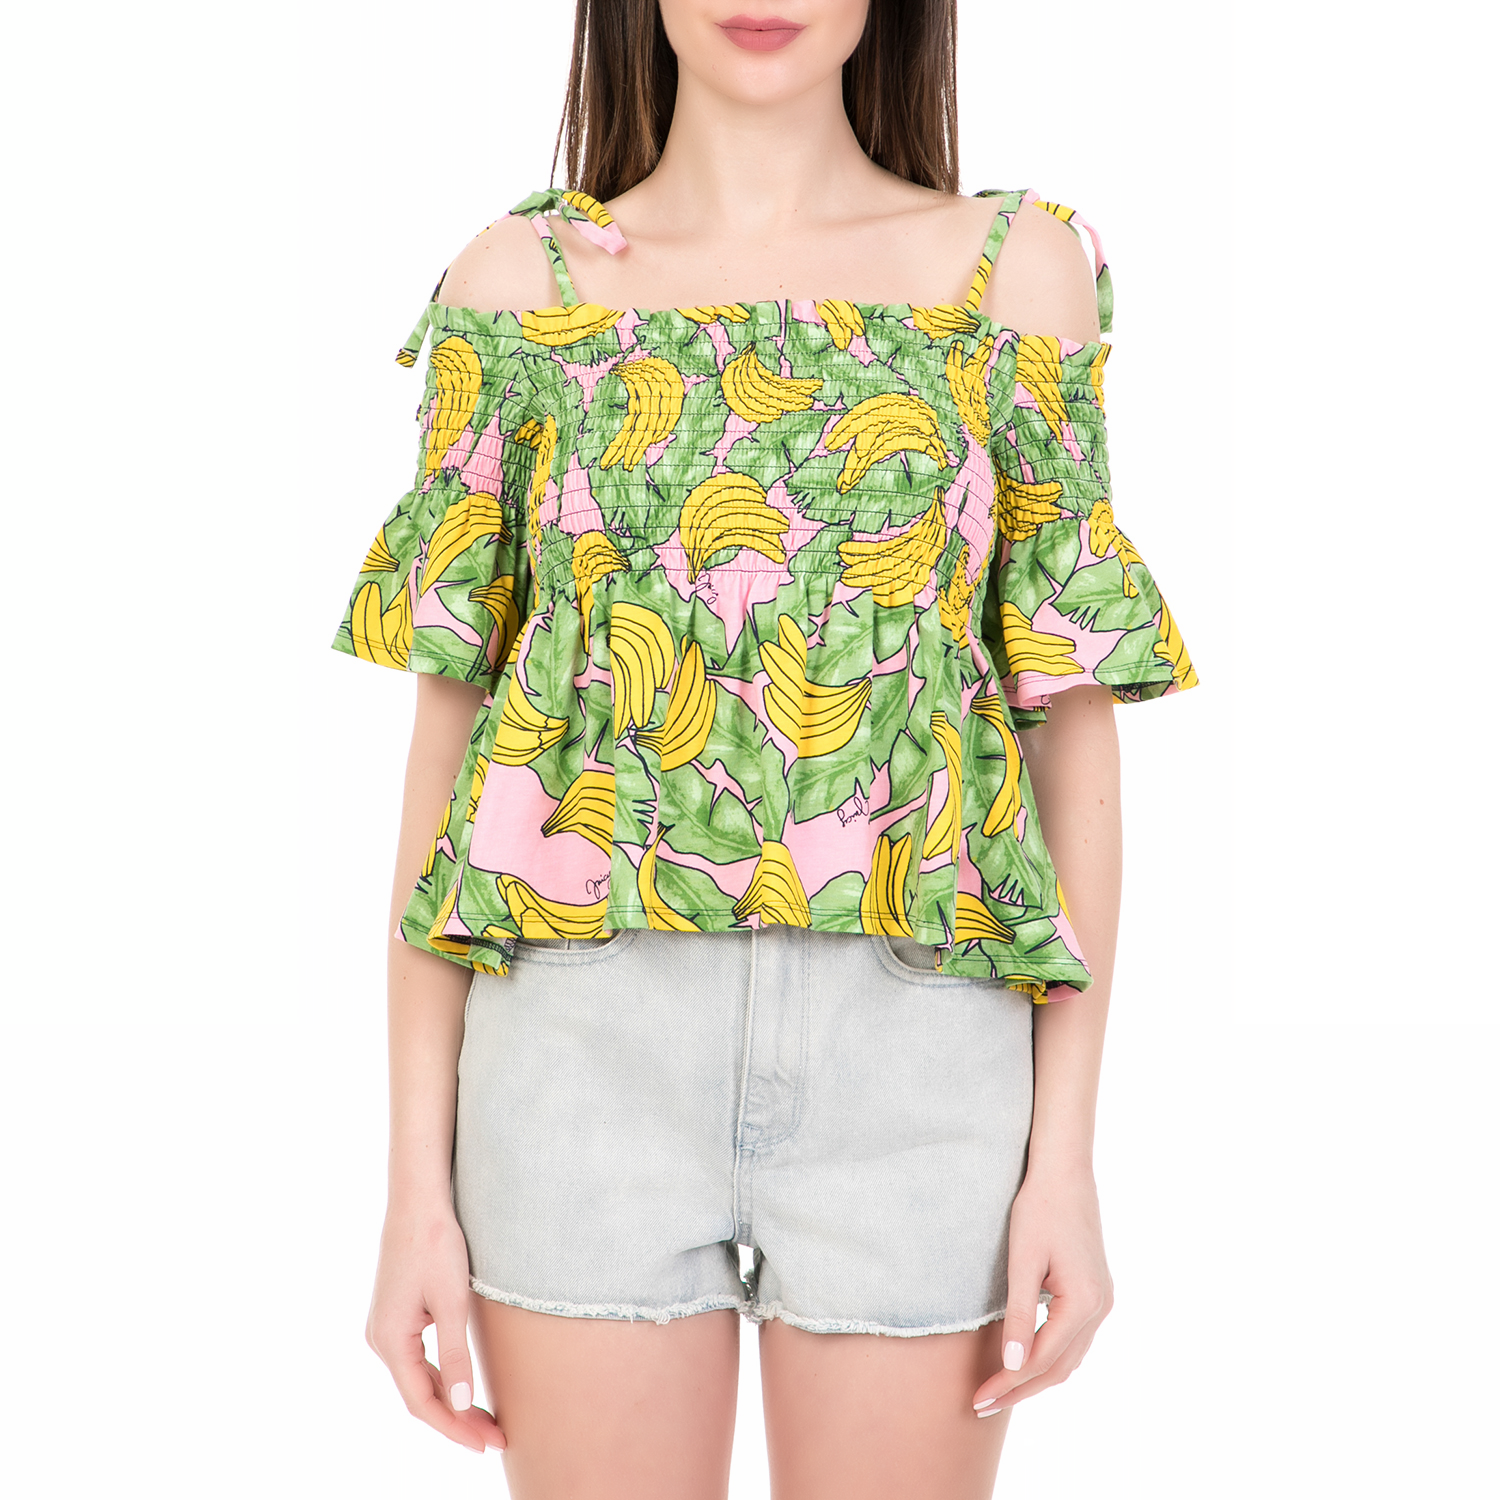 JUICY COUTURE – Γυναικεία off the shoulders μπλούζα BANANA PRINT JUICY COUTURE ροζ